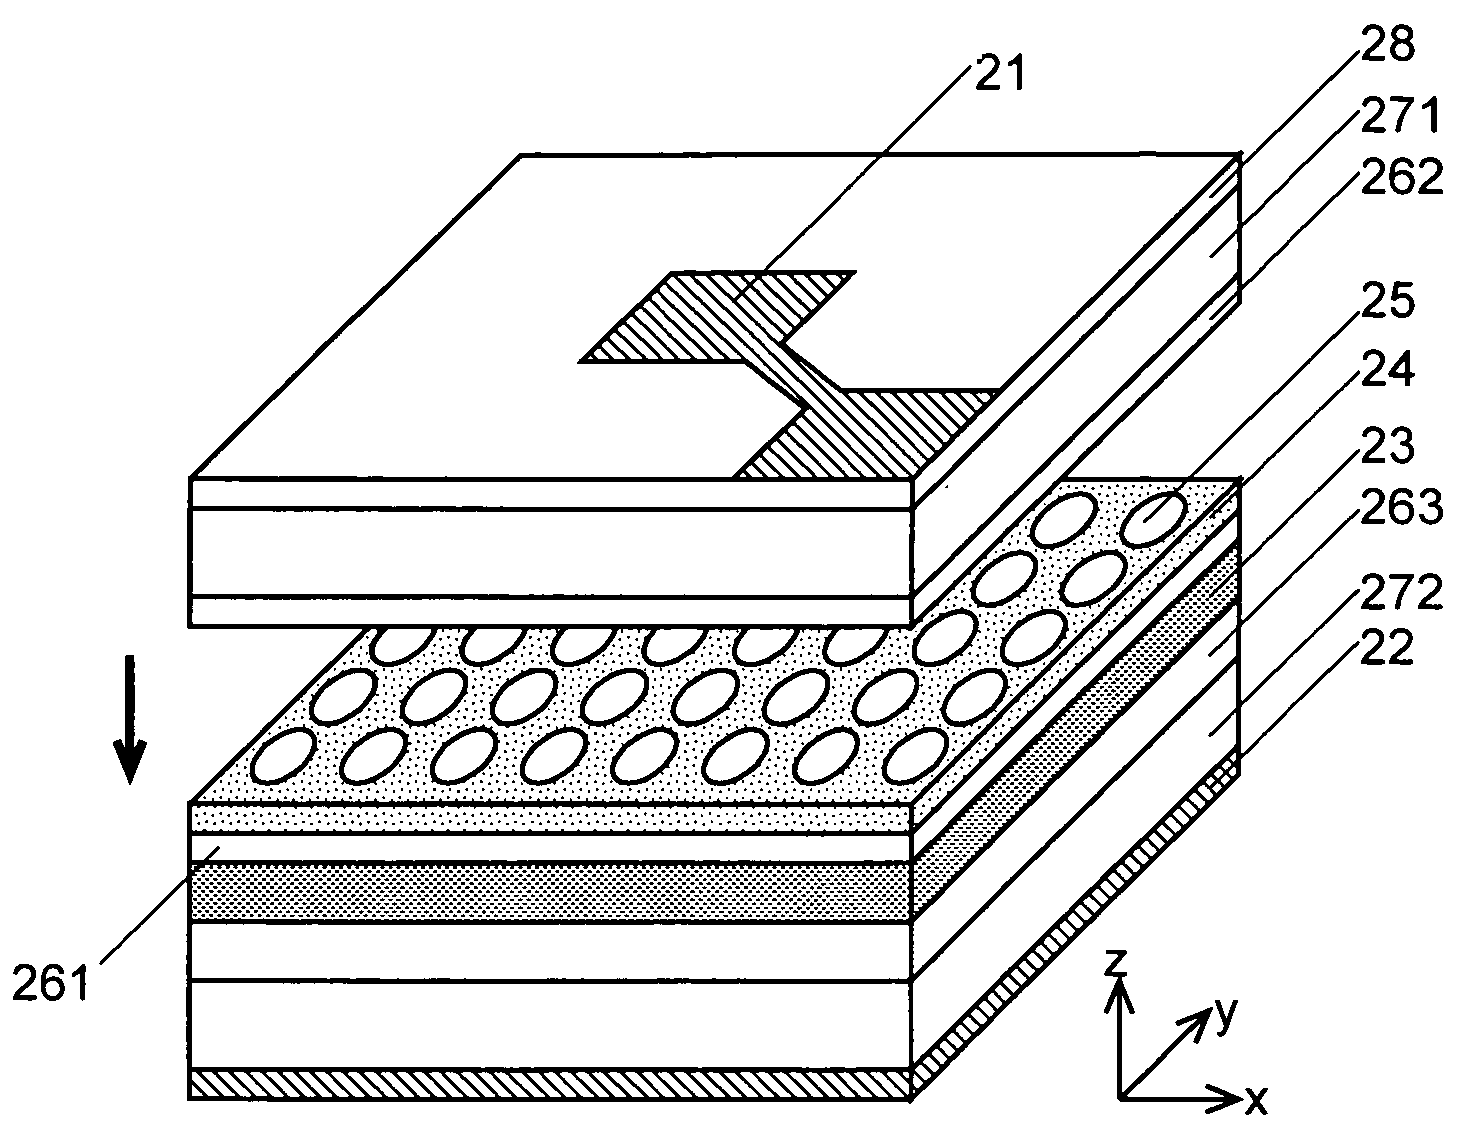 Surface-emitting laser light source using two-dimensional photonic crystal